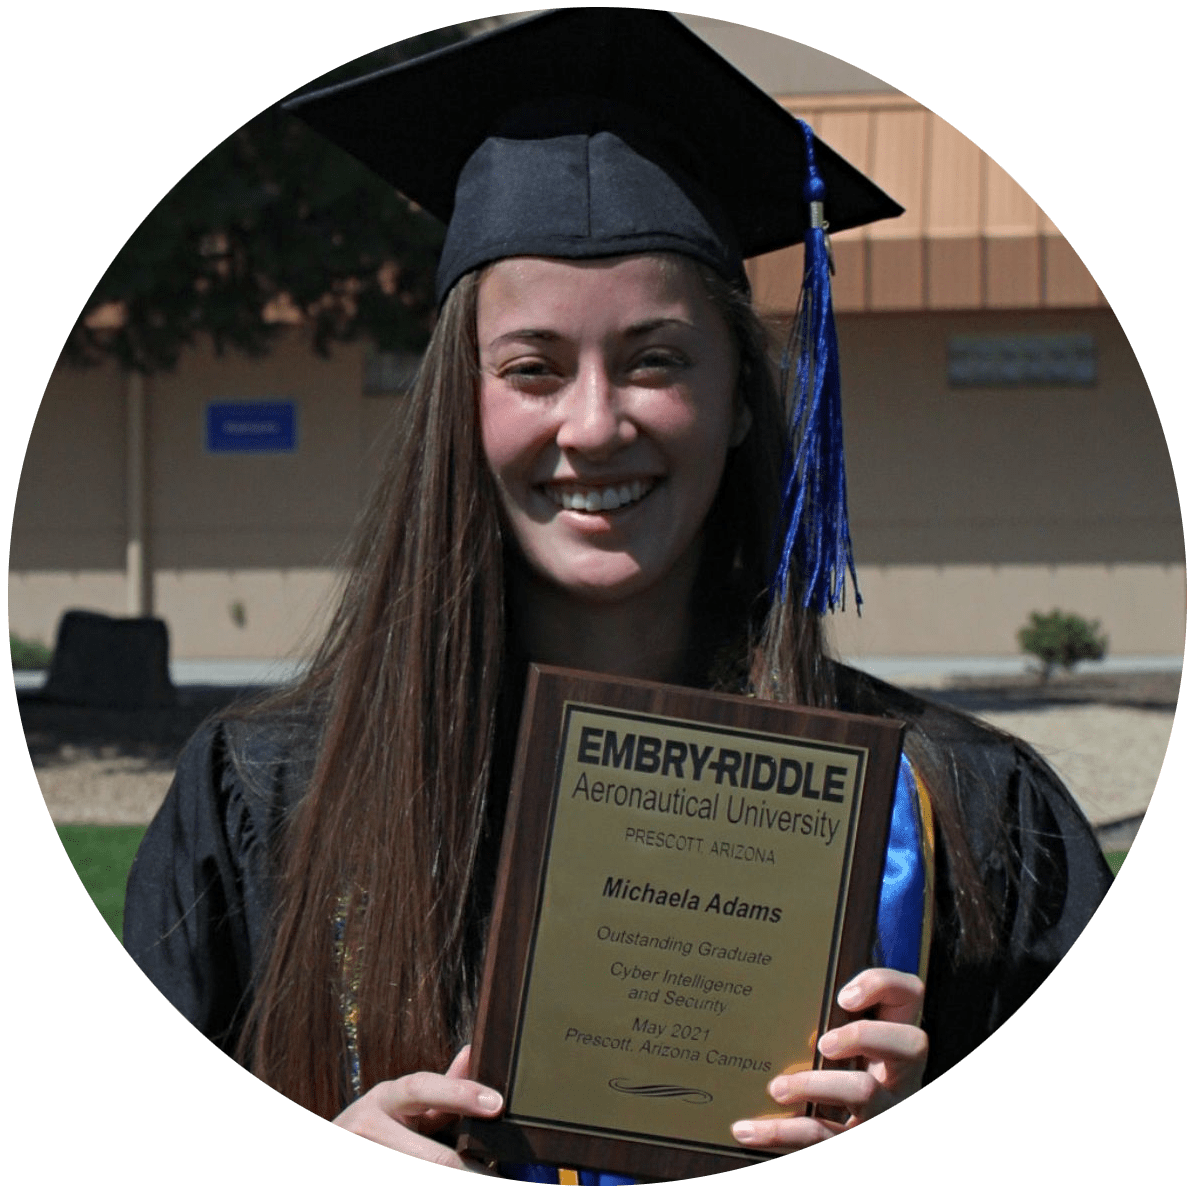 Alumna Michaela Adams graduated from Embry-Riddle's Cyber Intelligence and Security program in the Spring of 2021.